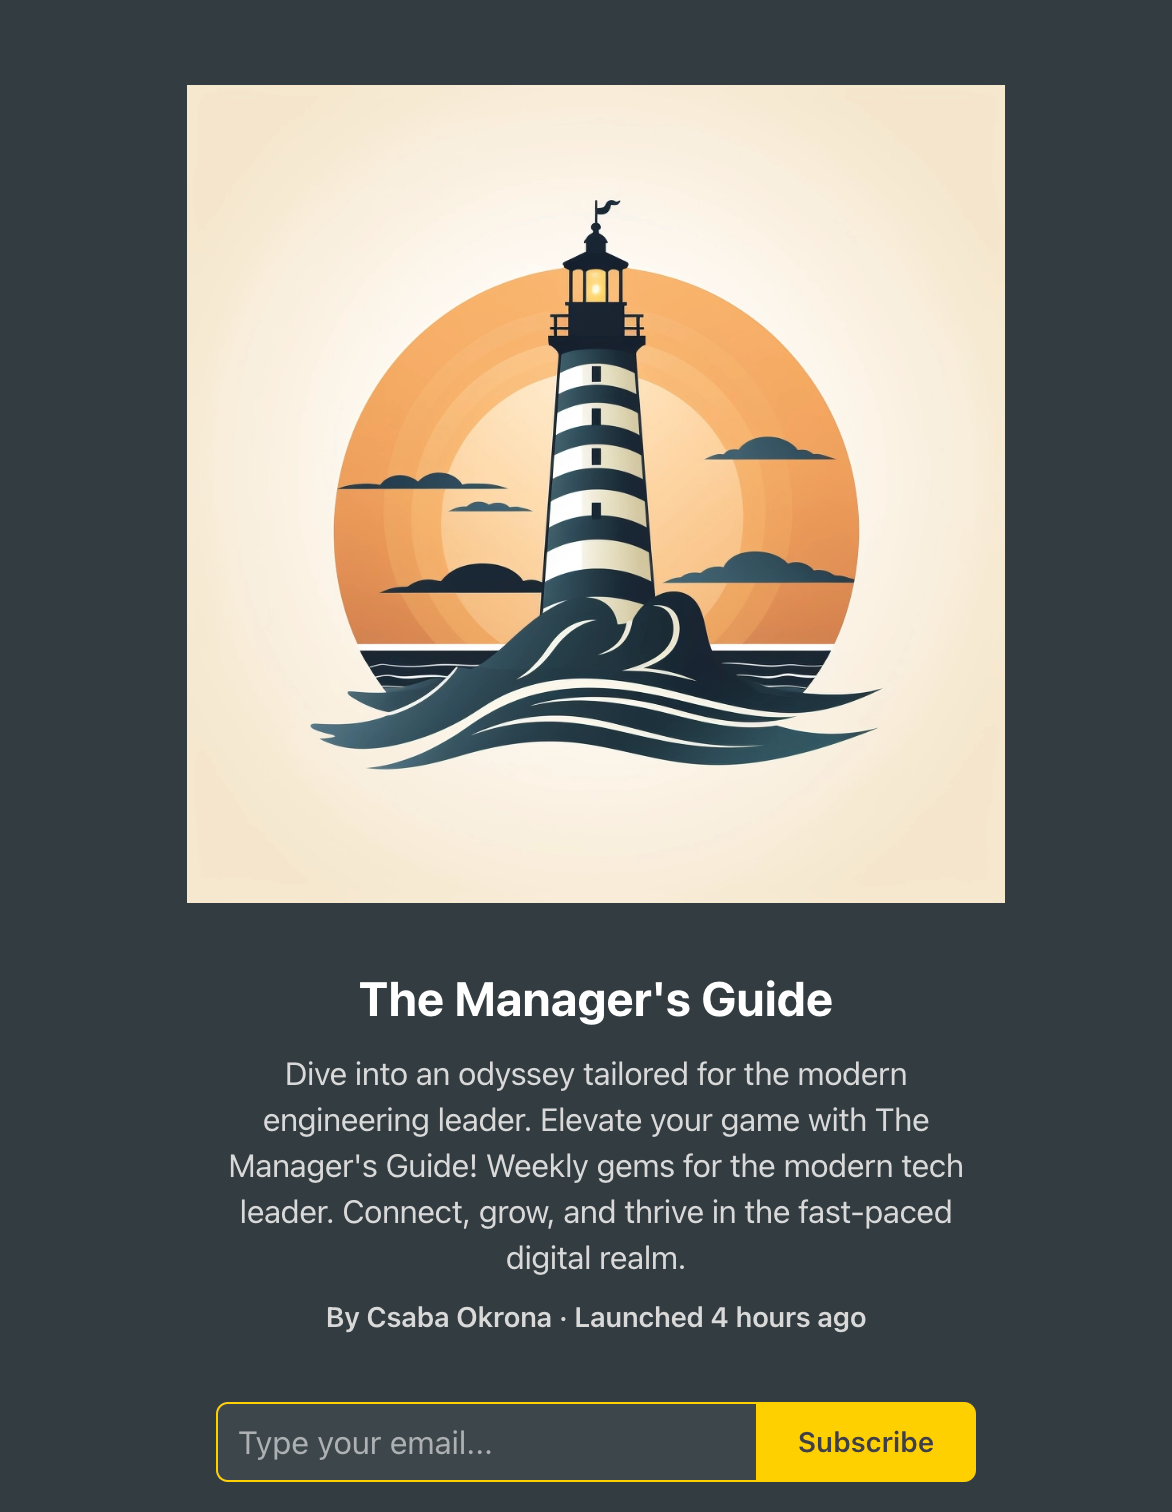 Moving to The Manager's Guide